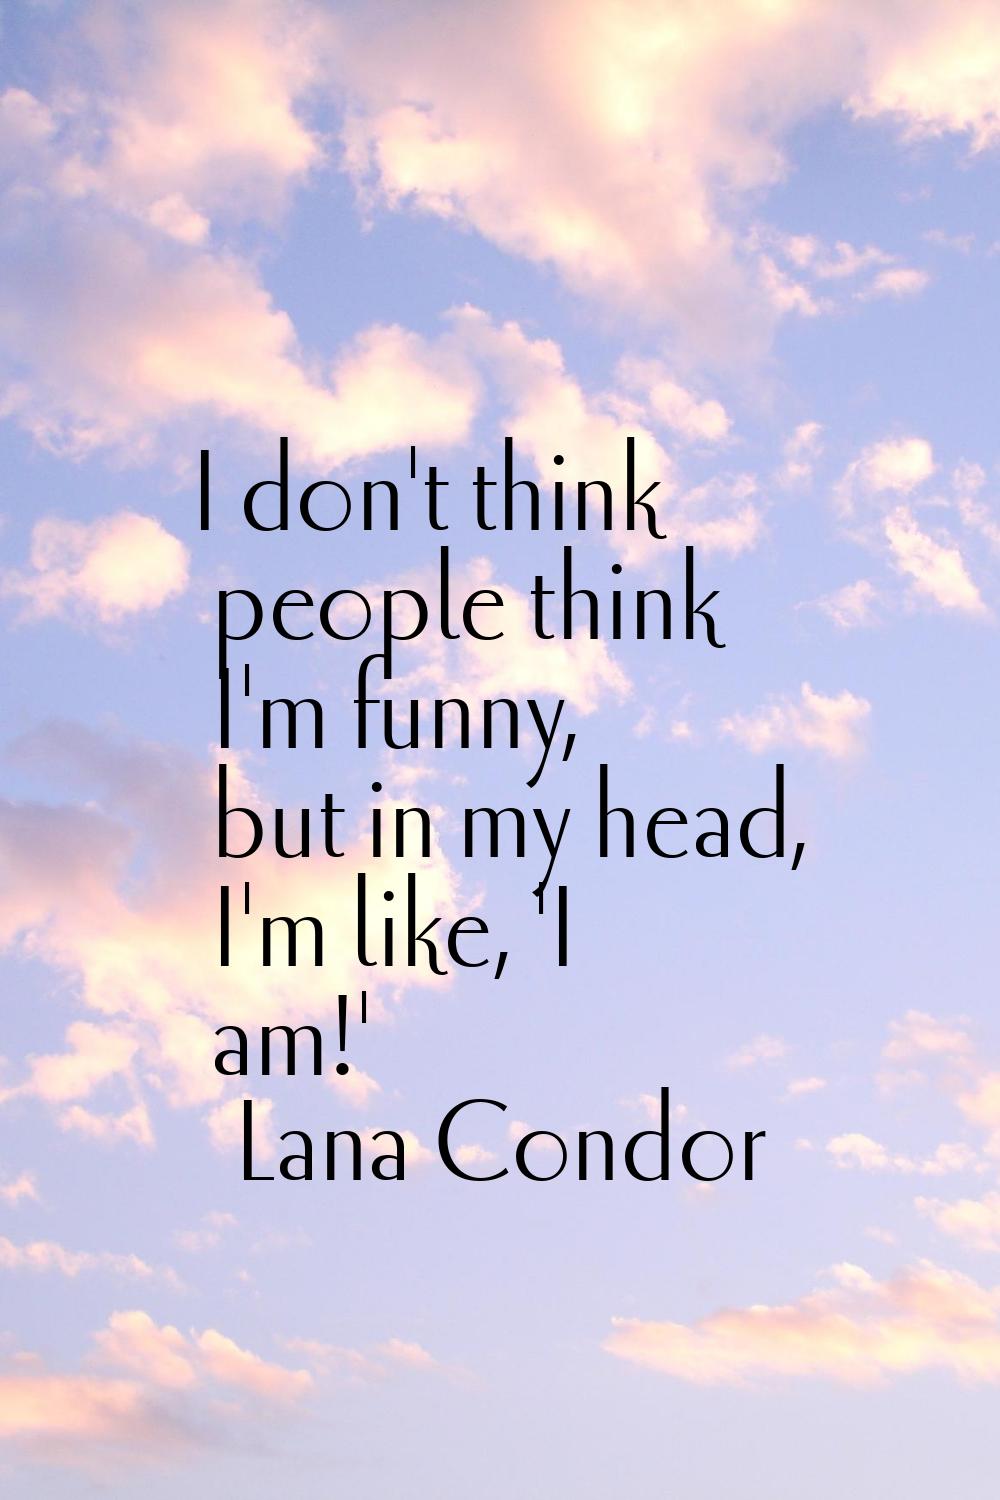 I don't think people think I'm funny, but in my head, I'm like, 'I am!'